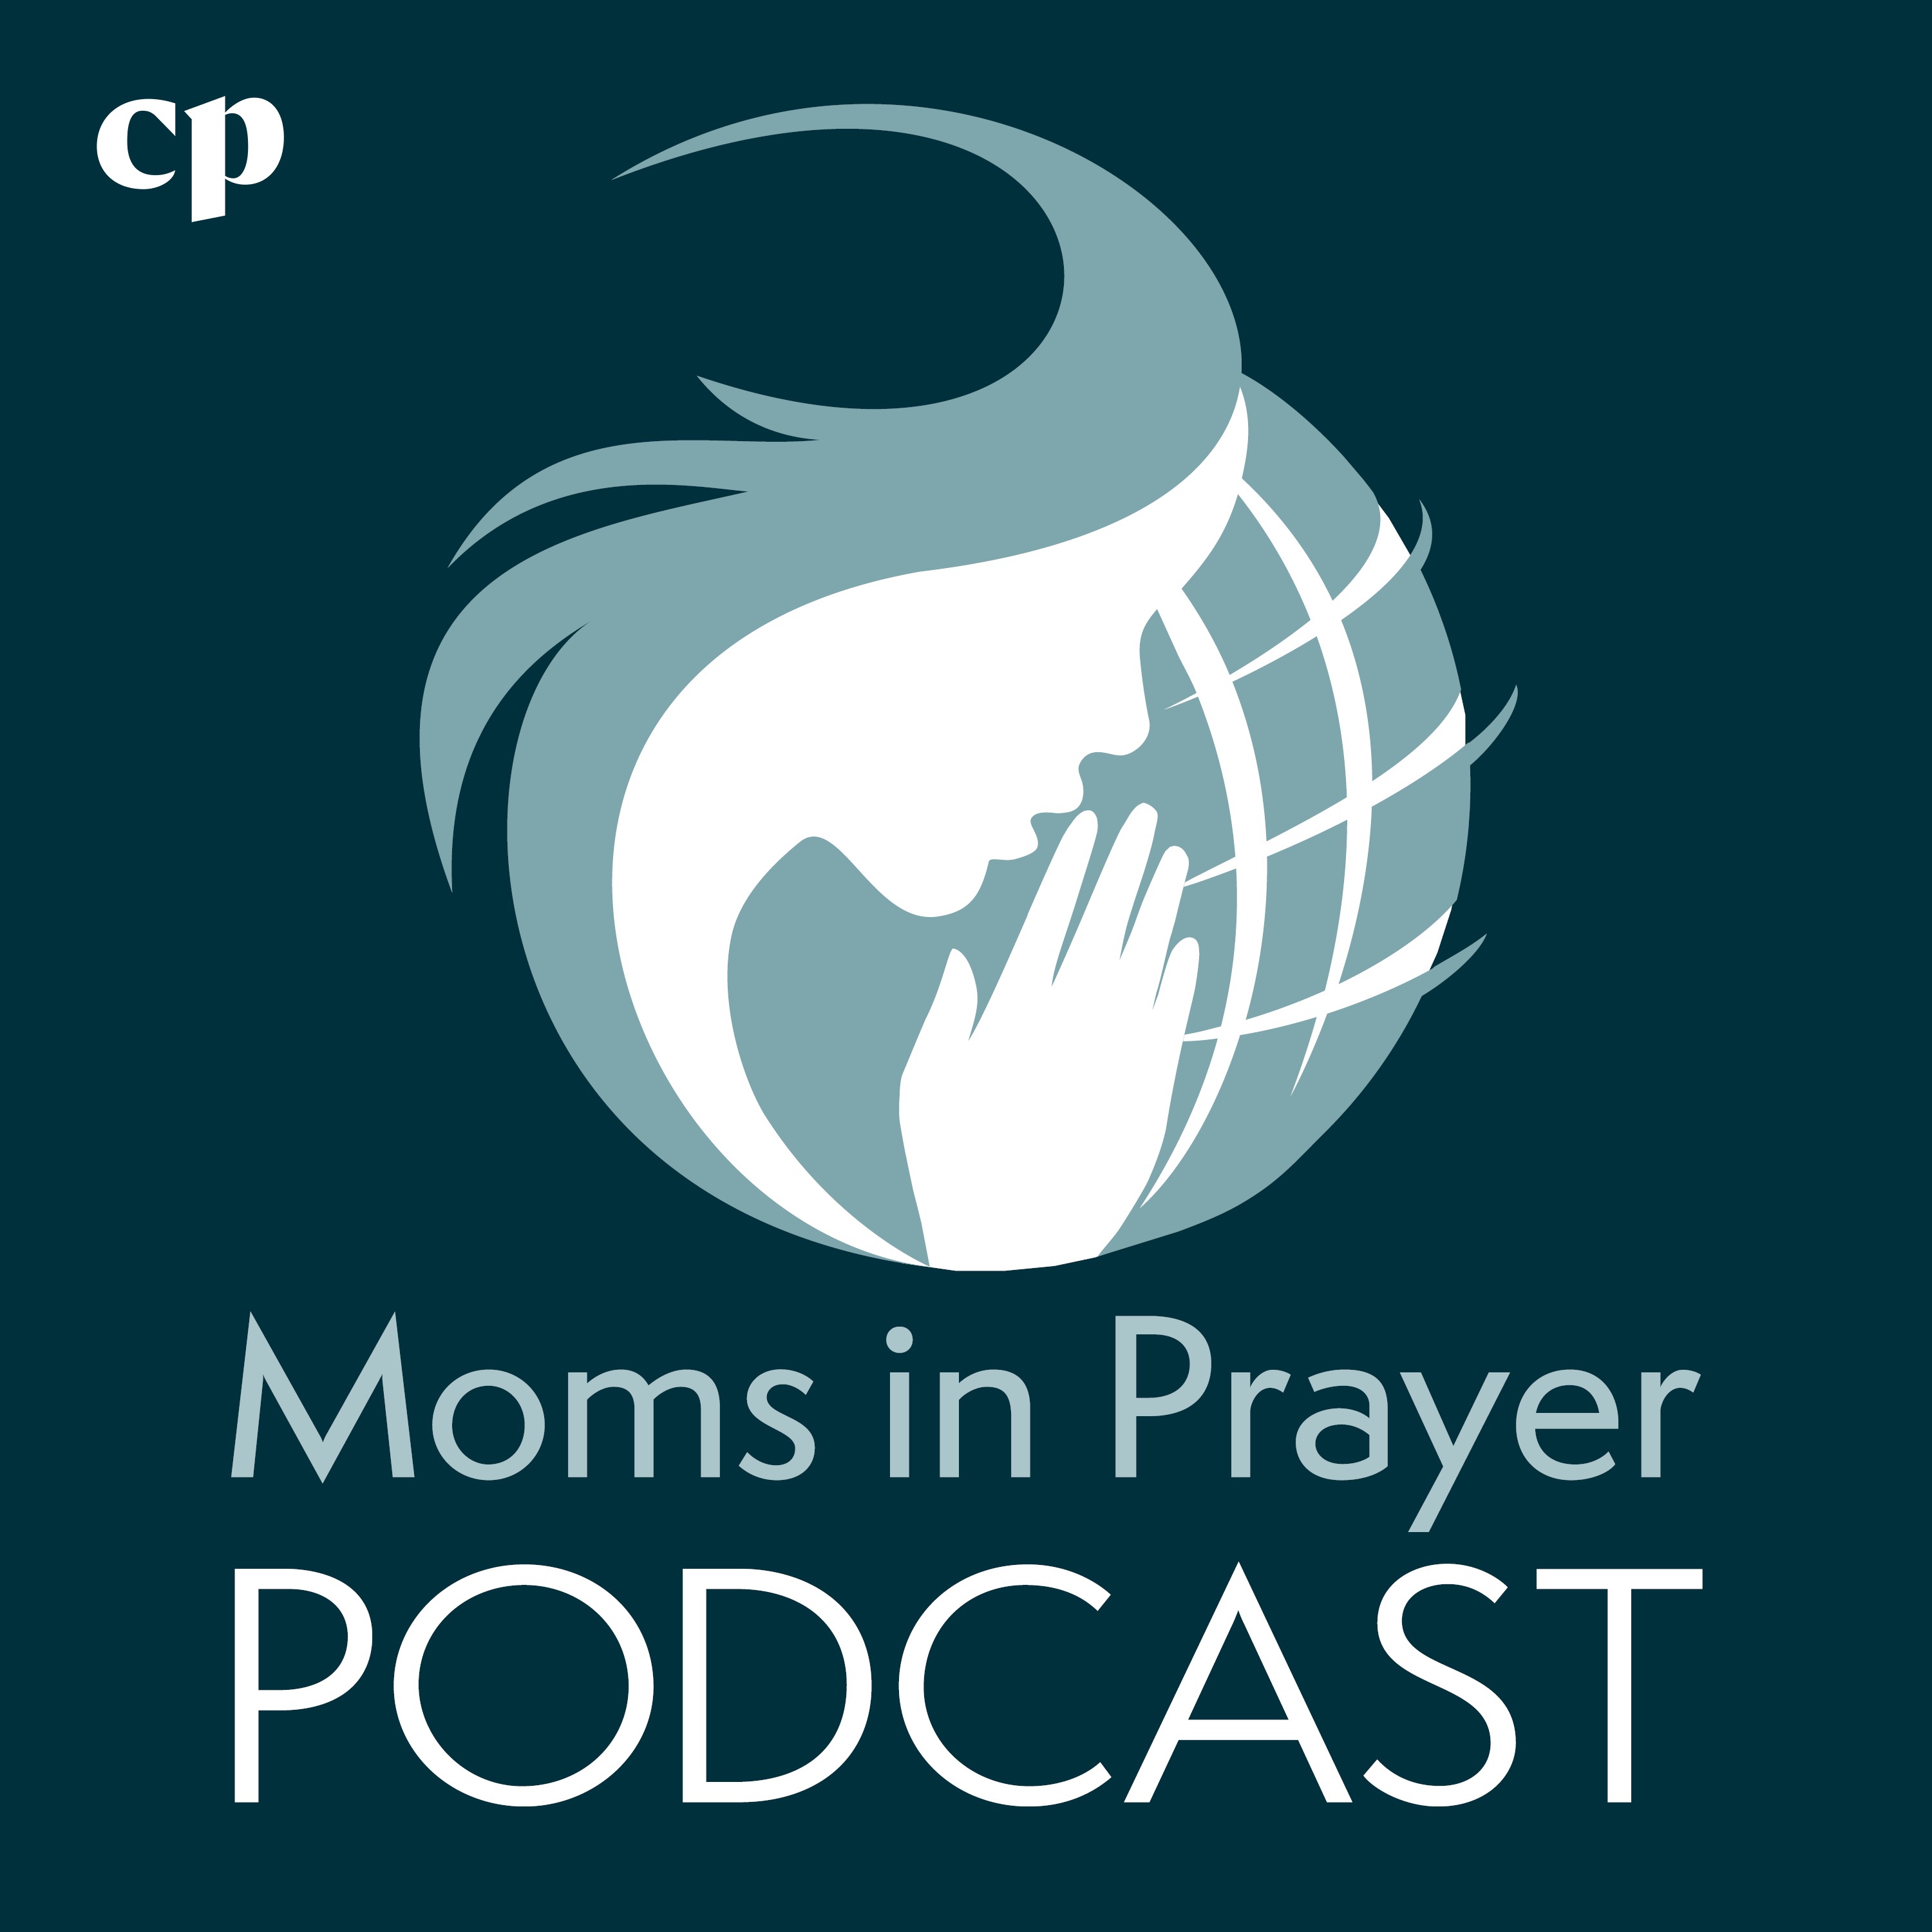 Episode 298 - How to Be Honest With God in Prayer with Hillary Morgan Ferrer & Julie Loos